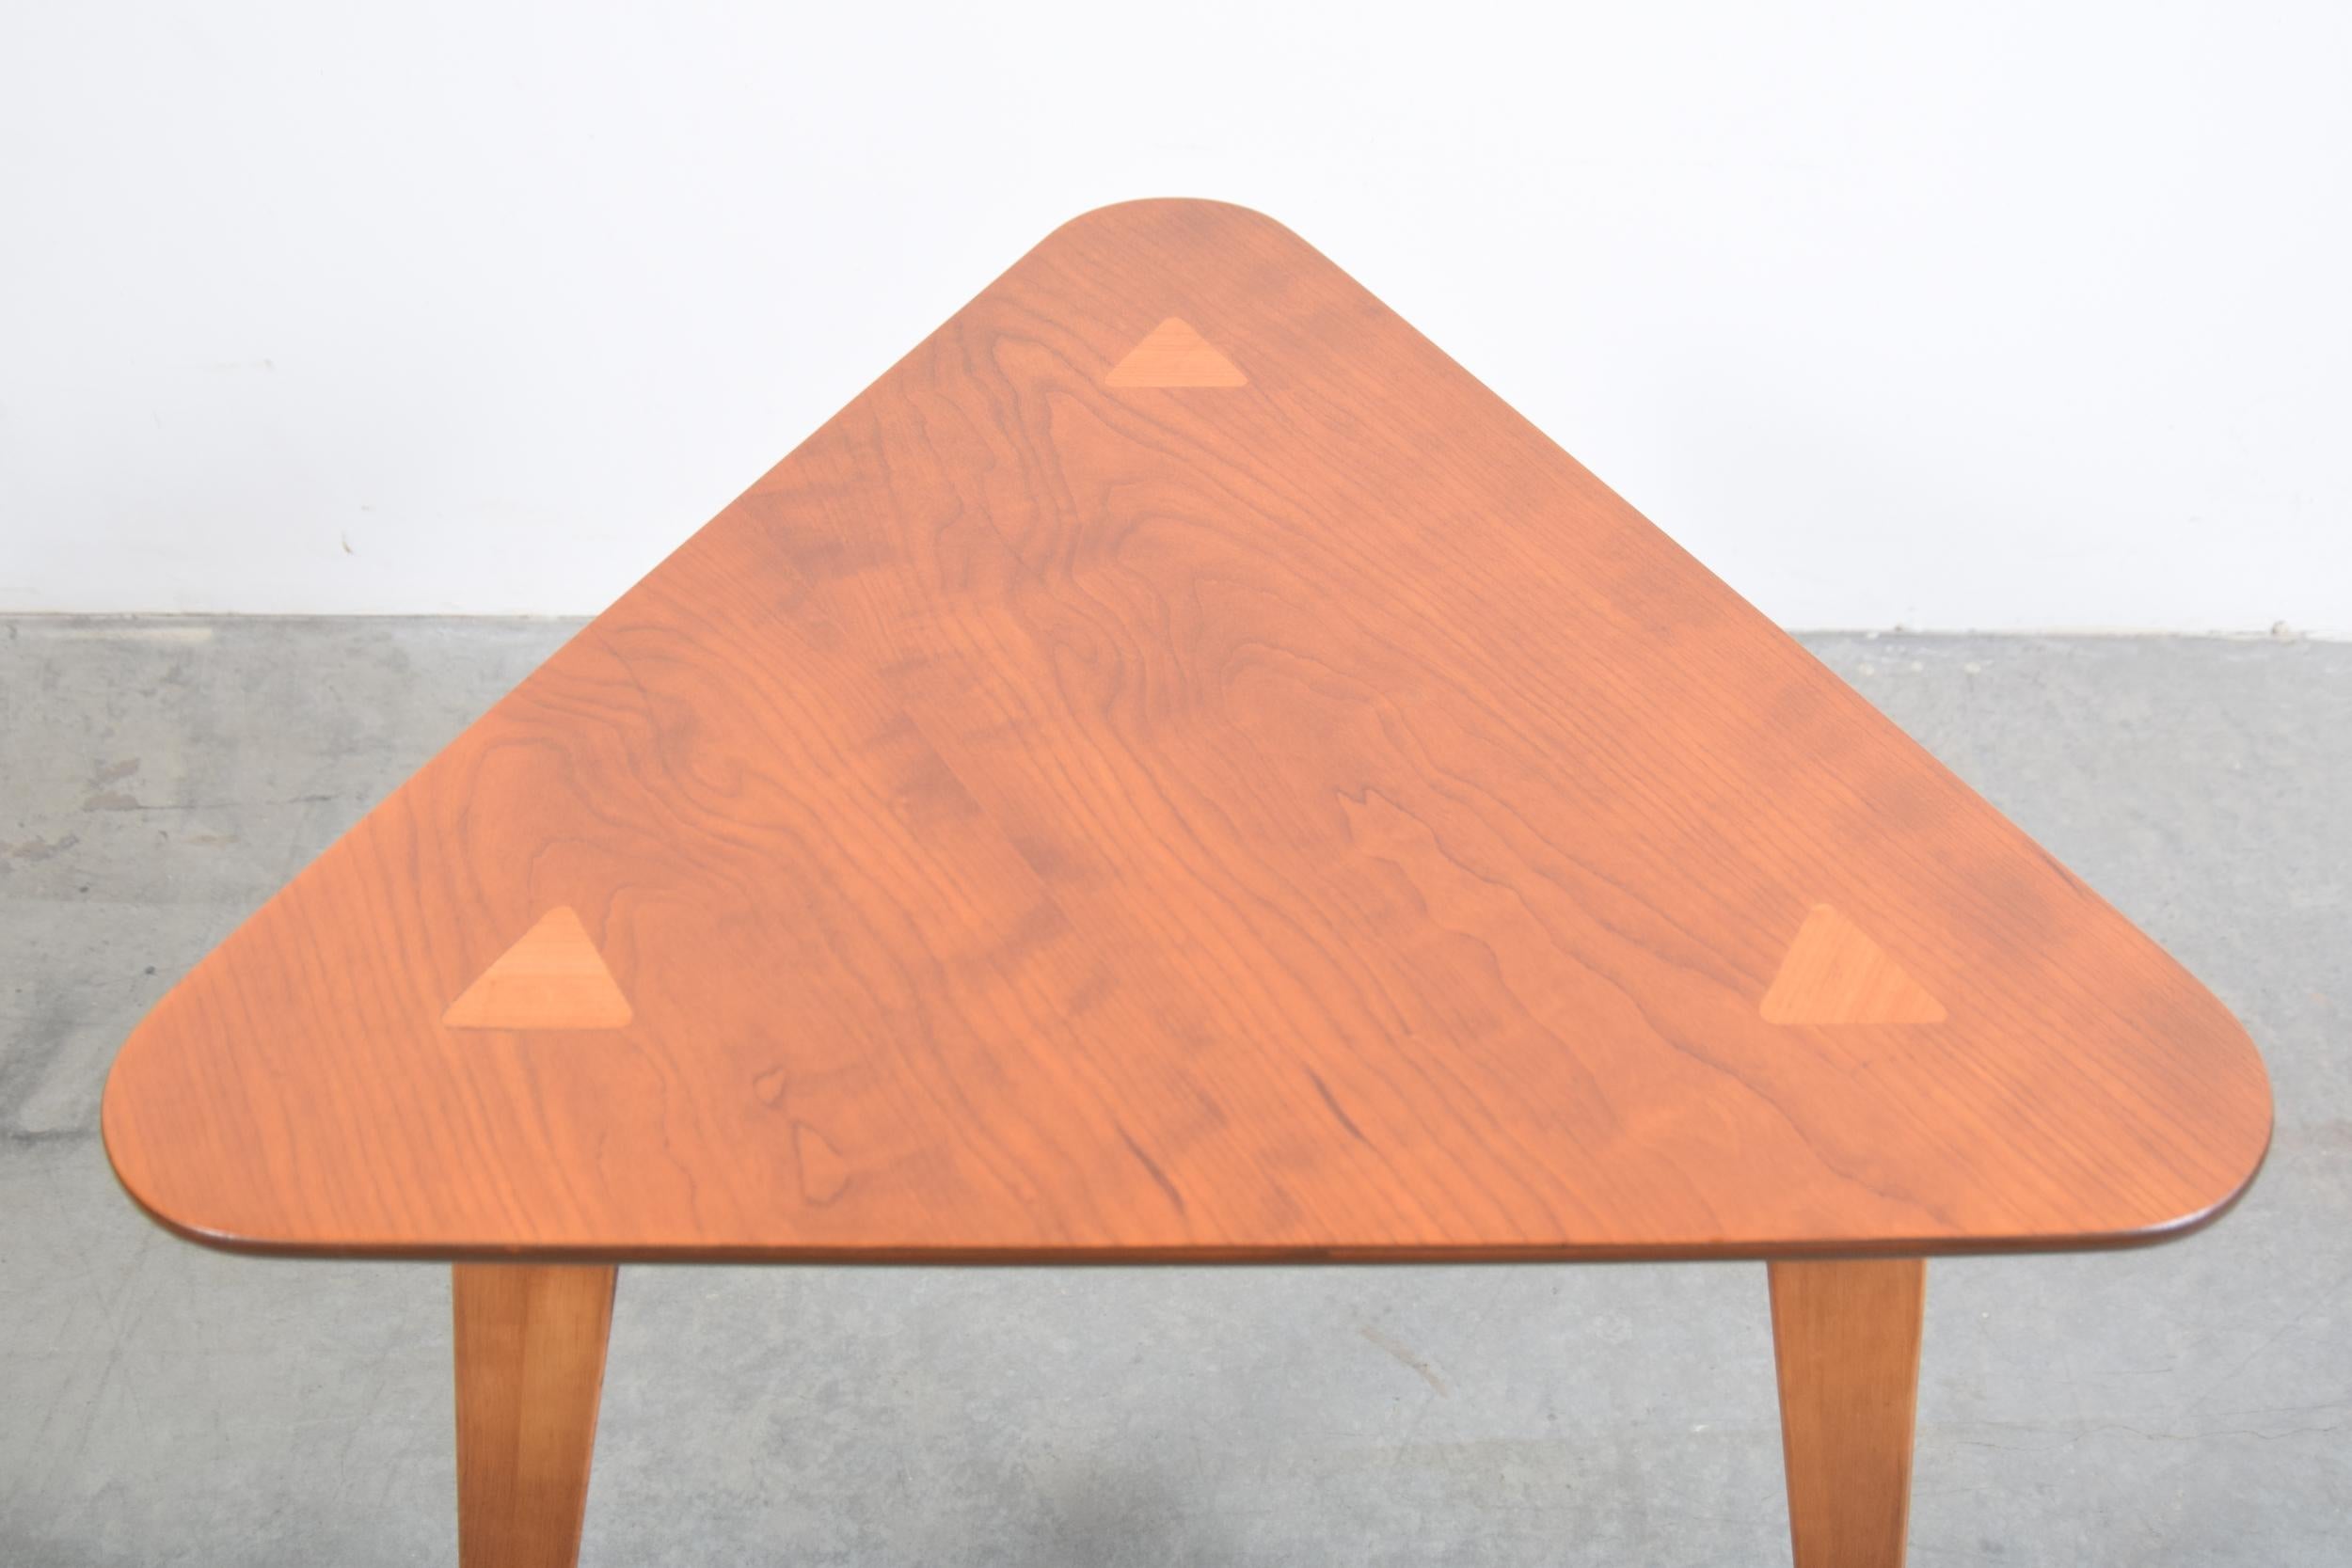 Triangular top lamp table, circa 1955. The top appears to be Japanese Elm, and the legs appears to be Baltic birch. The legs through tenon on the three corners of the top, which is a nice detail. The table measures 25